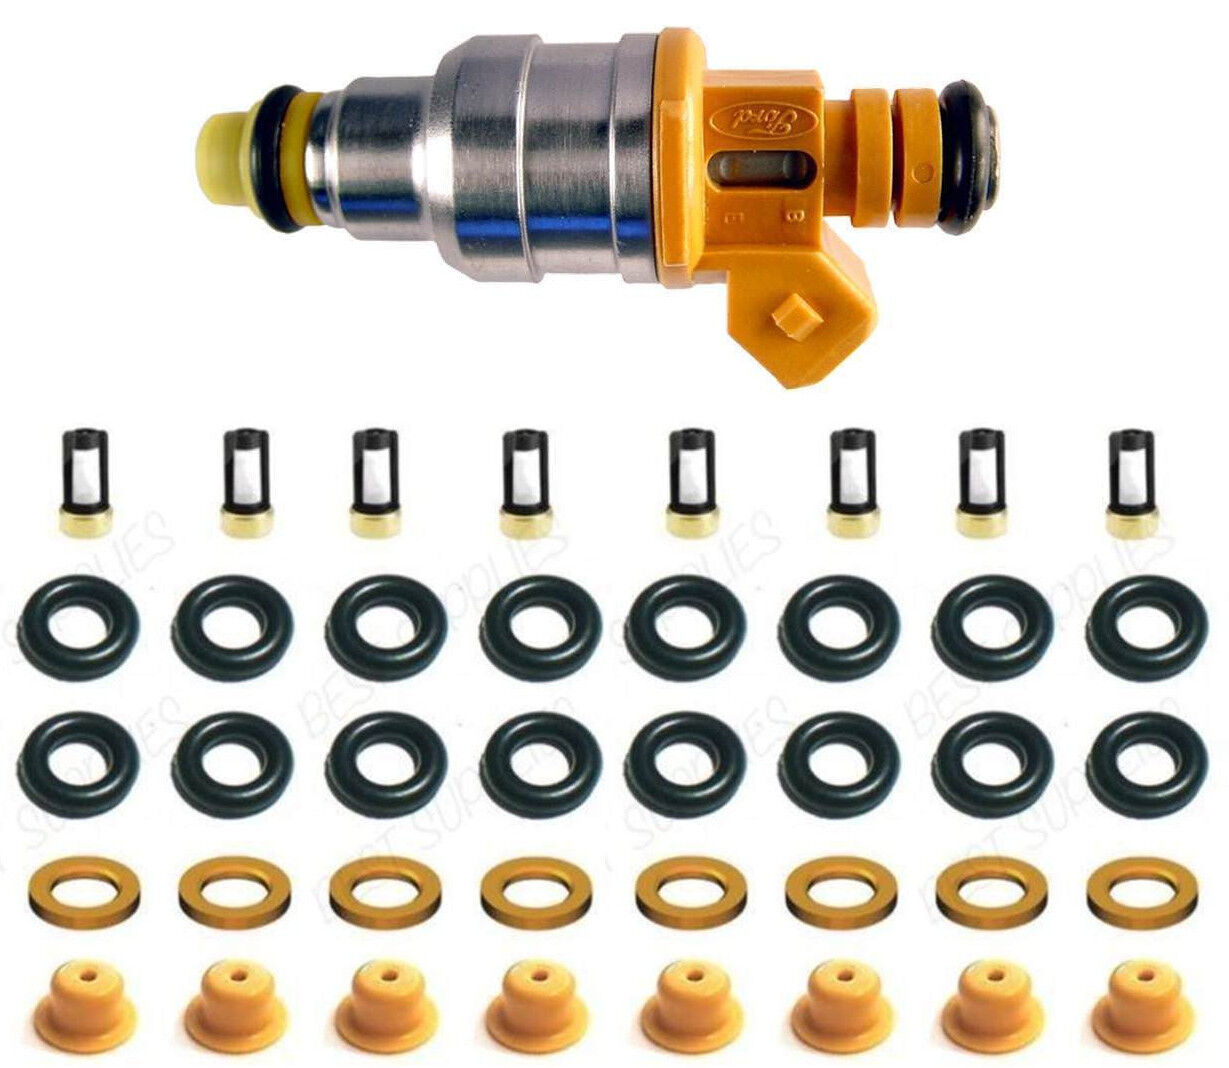 FUEL INJECTOR REPAIR KIT O-RINGS, CAPS, SPACER FILTERS FOR FORD MERC LINC V8